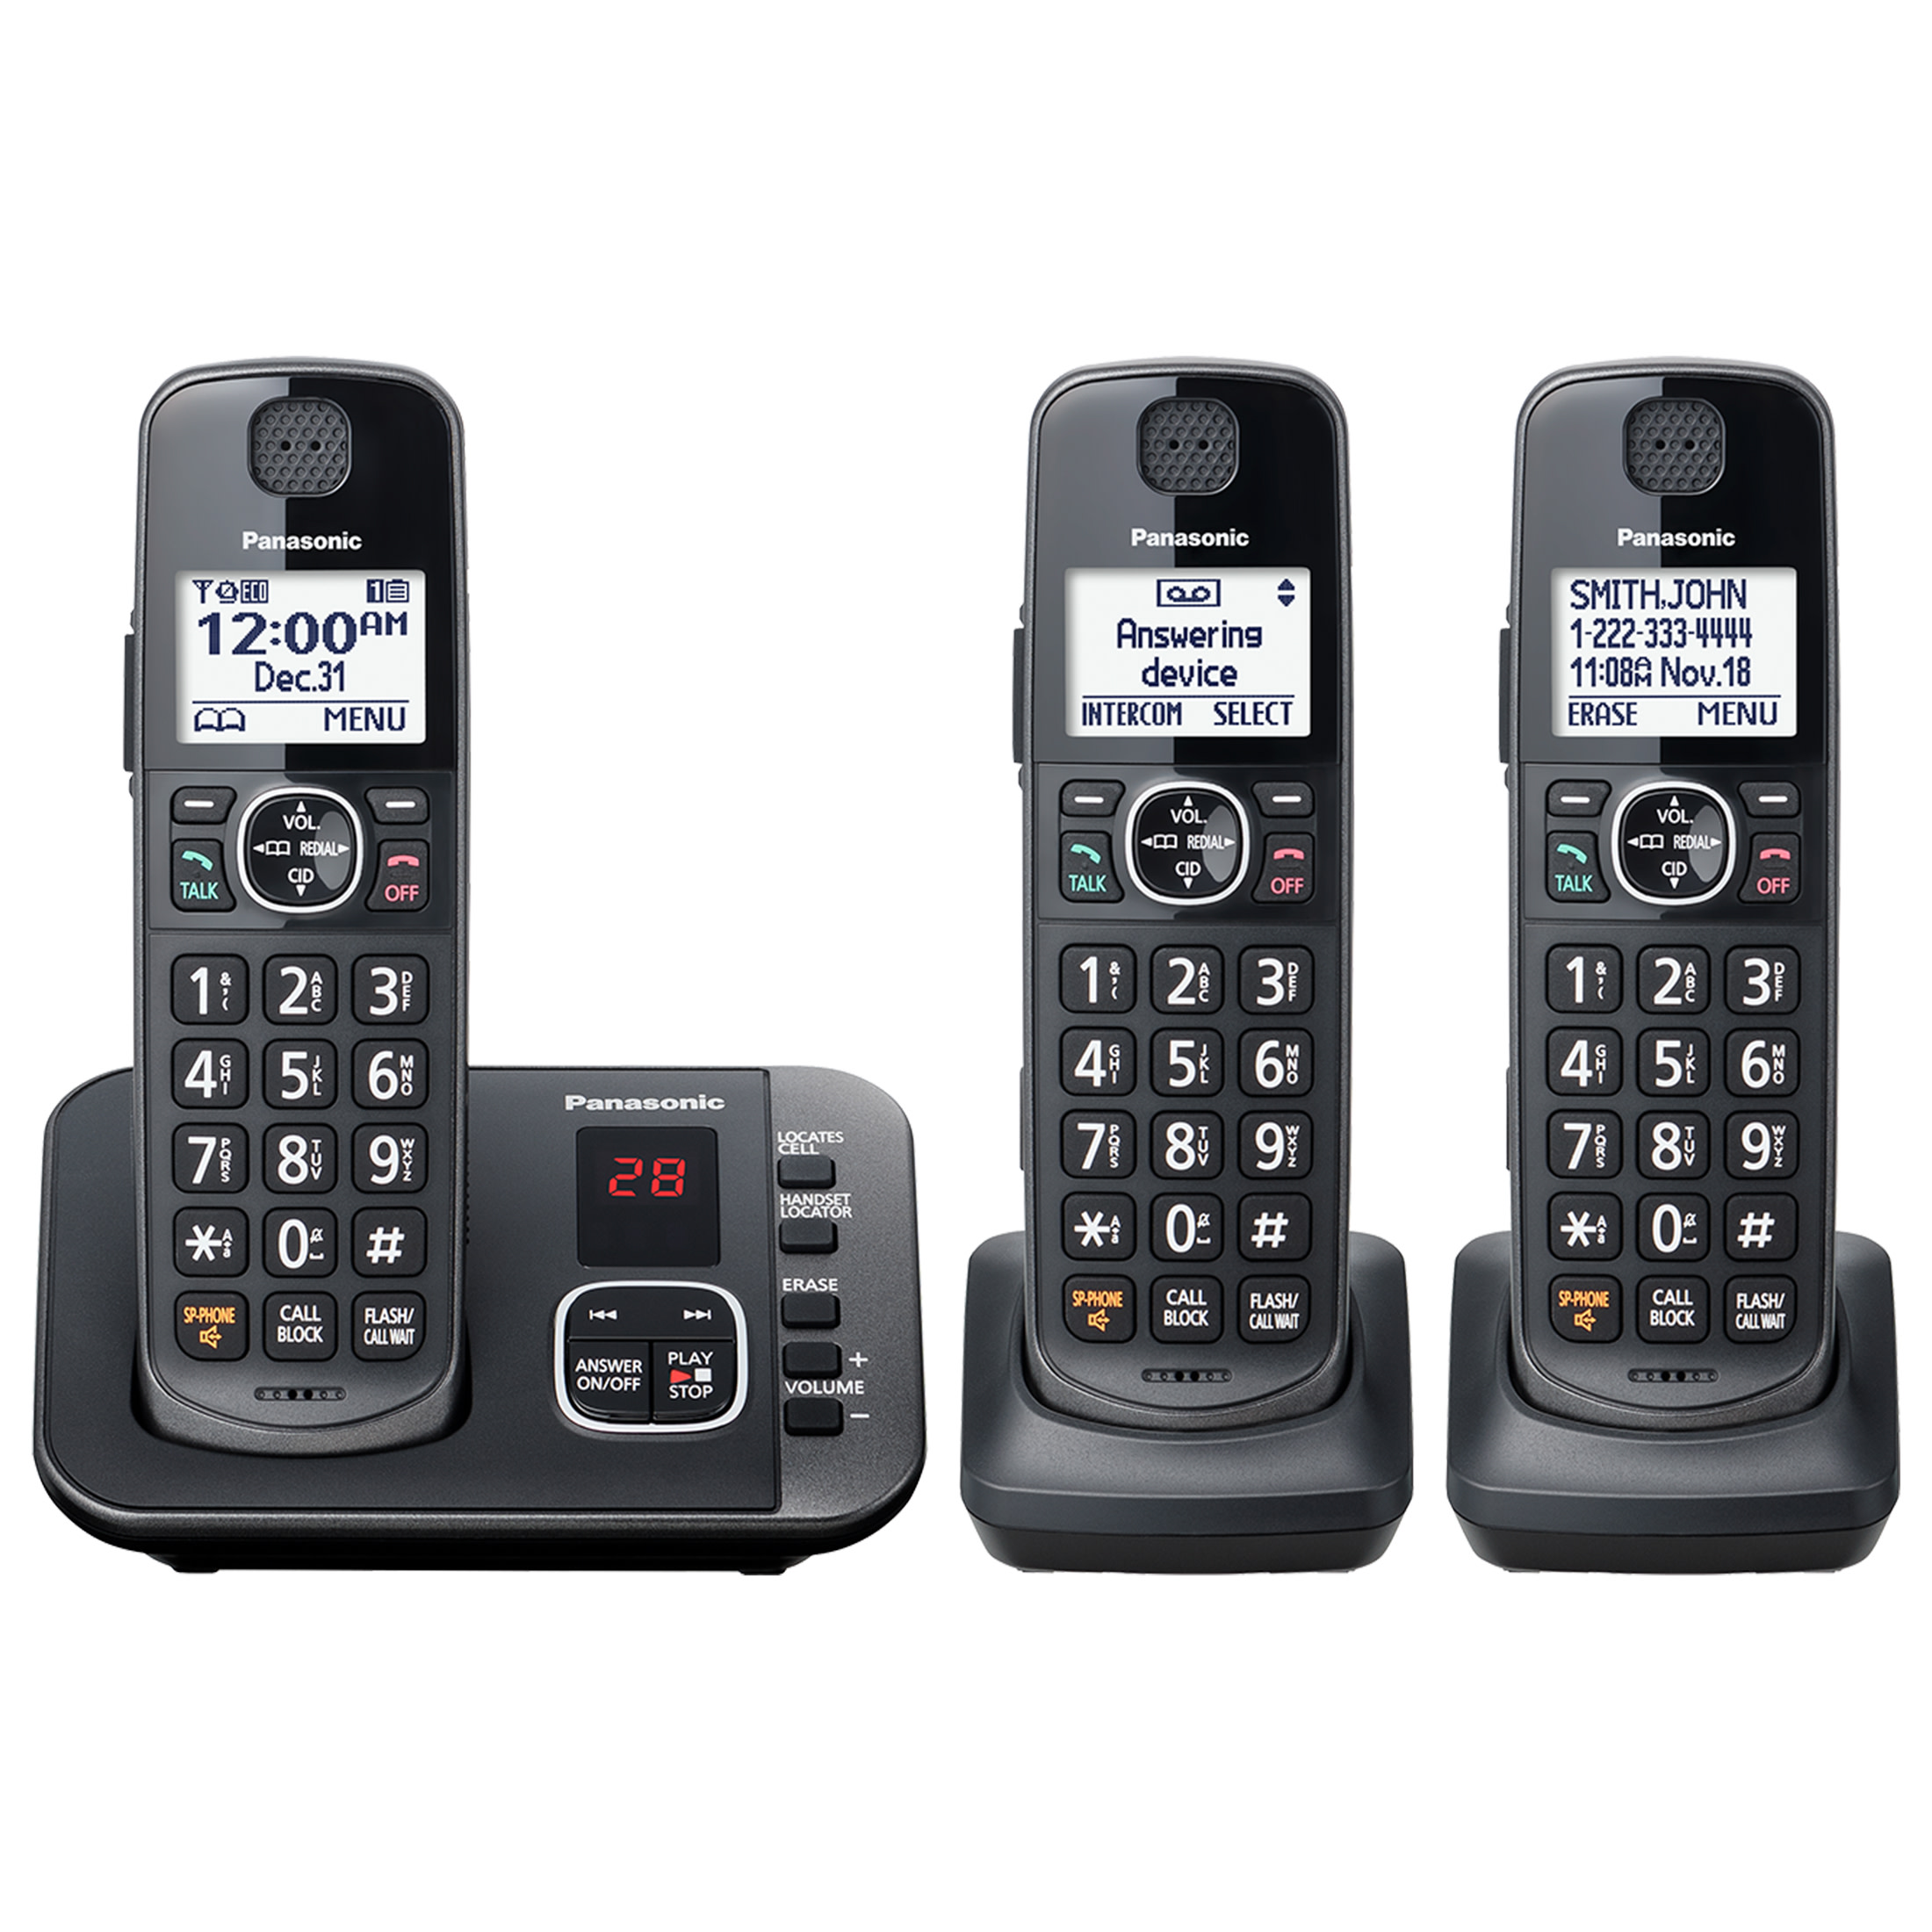 Panasonic 3-Handset Expandable Cordless Phone System with Answering System - KX-TG3833M - image 1 of 9